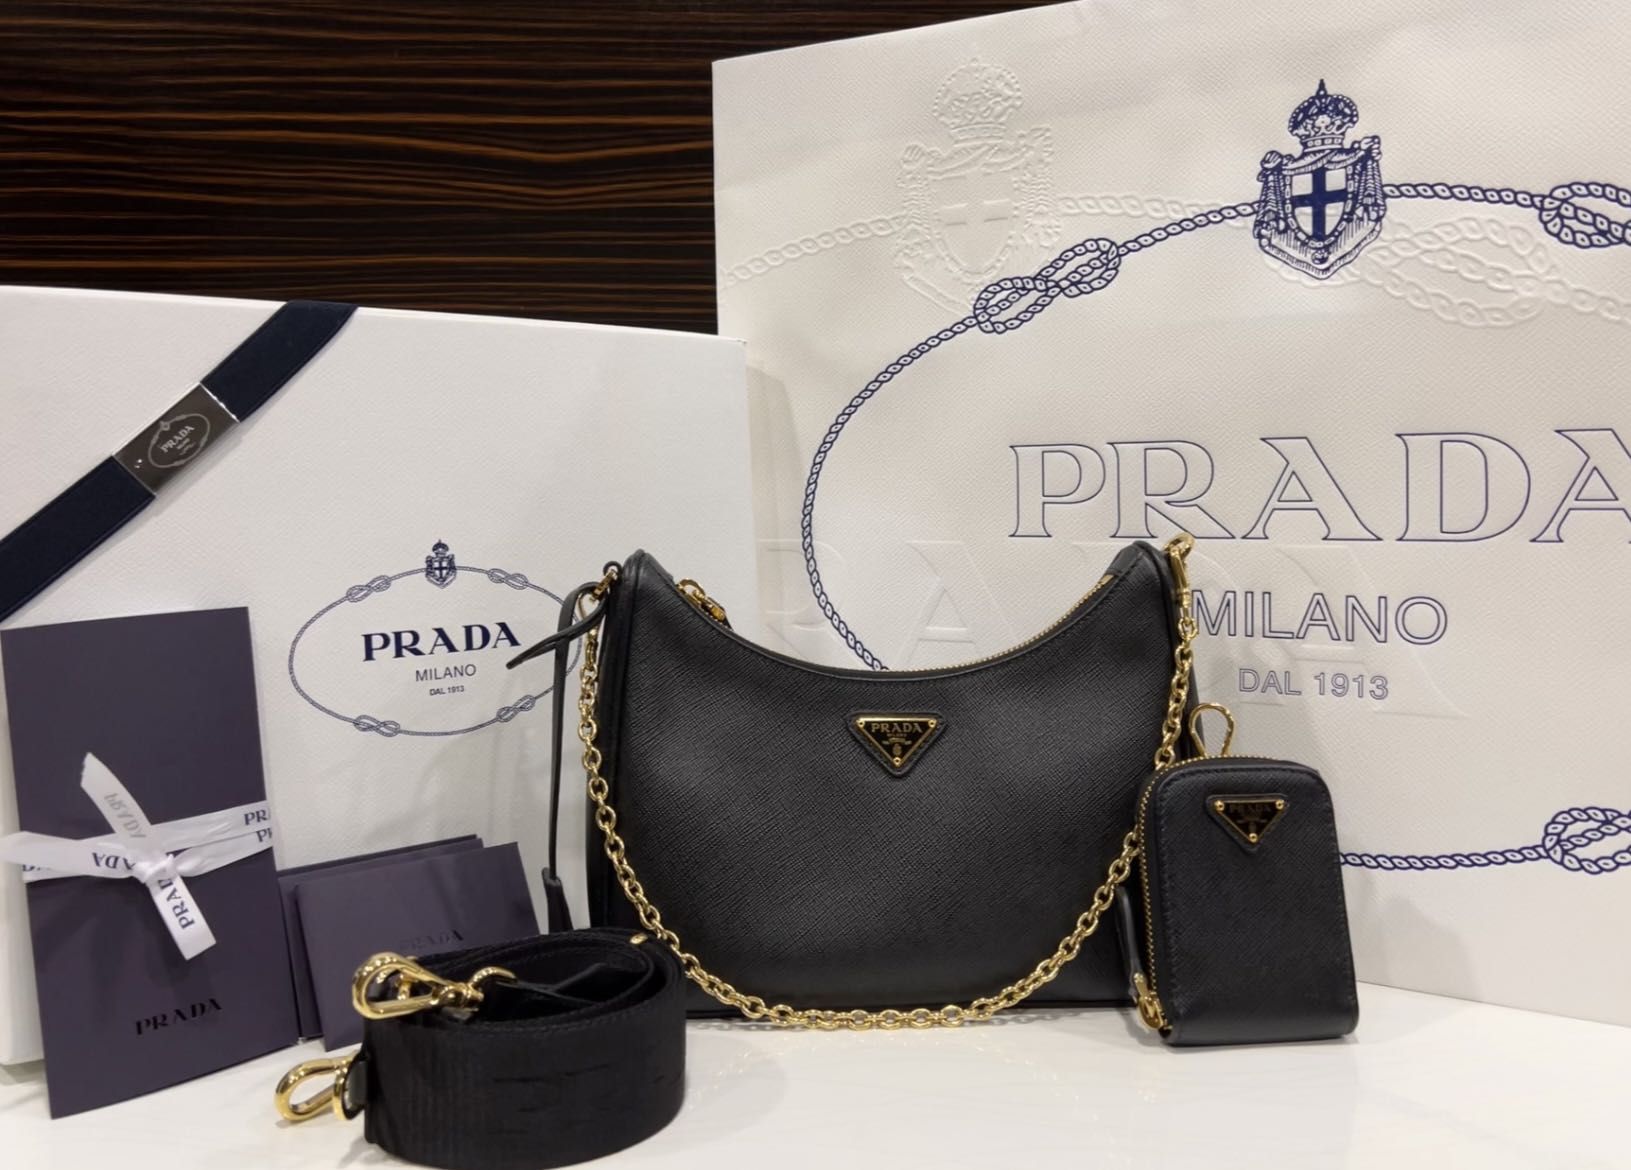 PRADA RE-EDITION 2005 SAFFIANO LEATHER BAG UNBOXING & REVIEW!